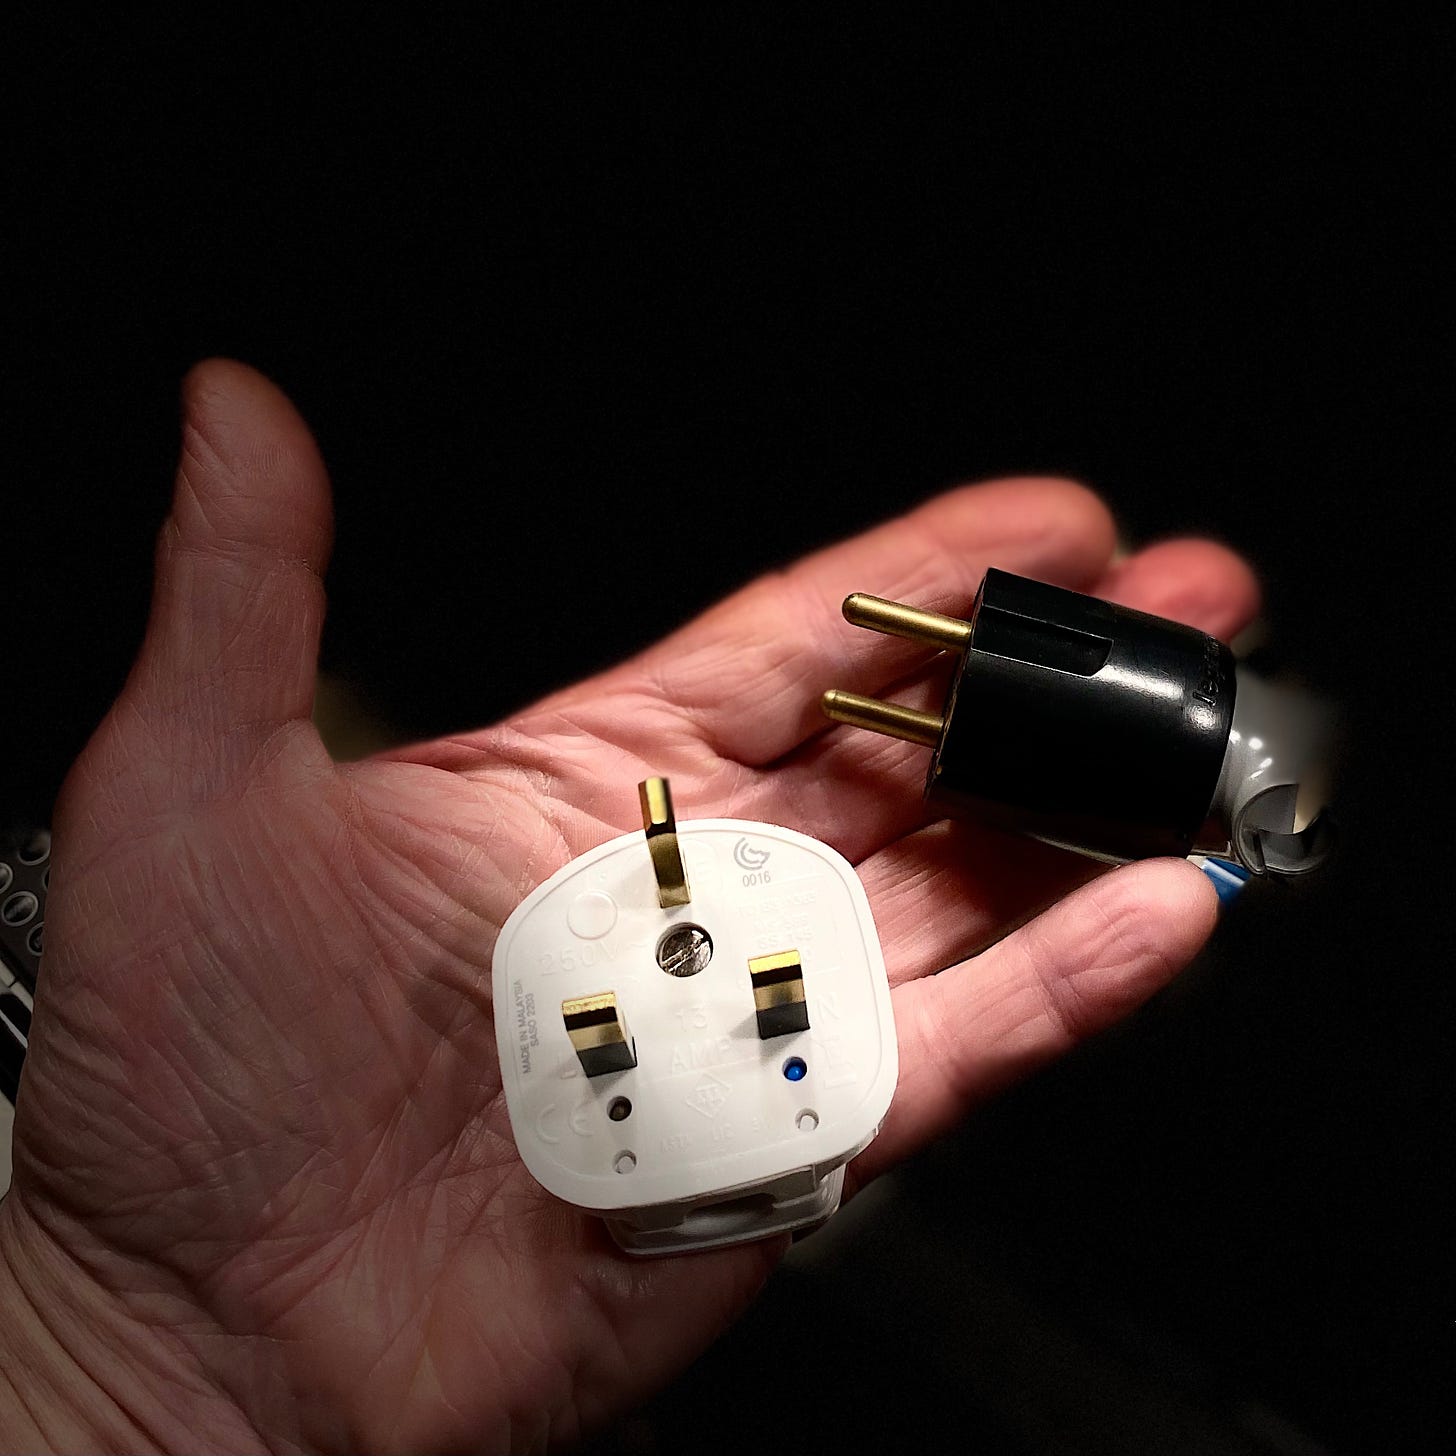 A British and European mains plugs